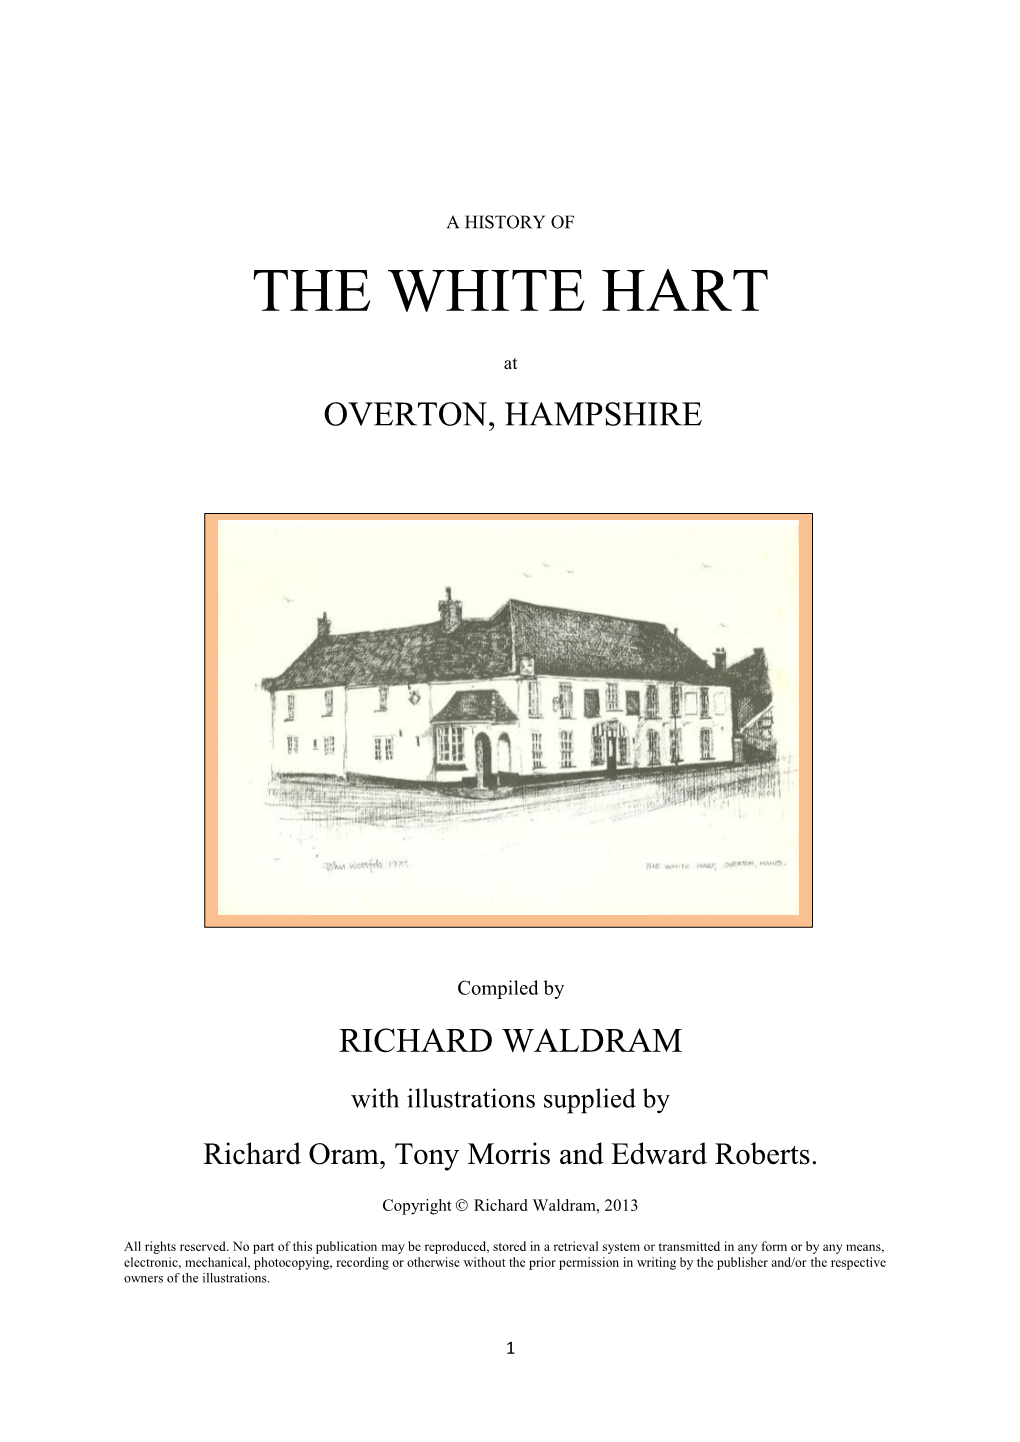 History of the White Hart